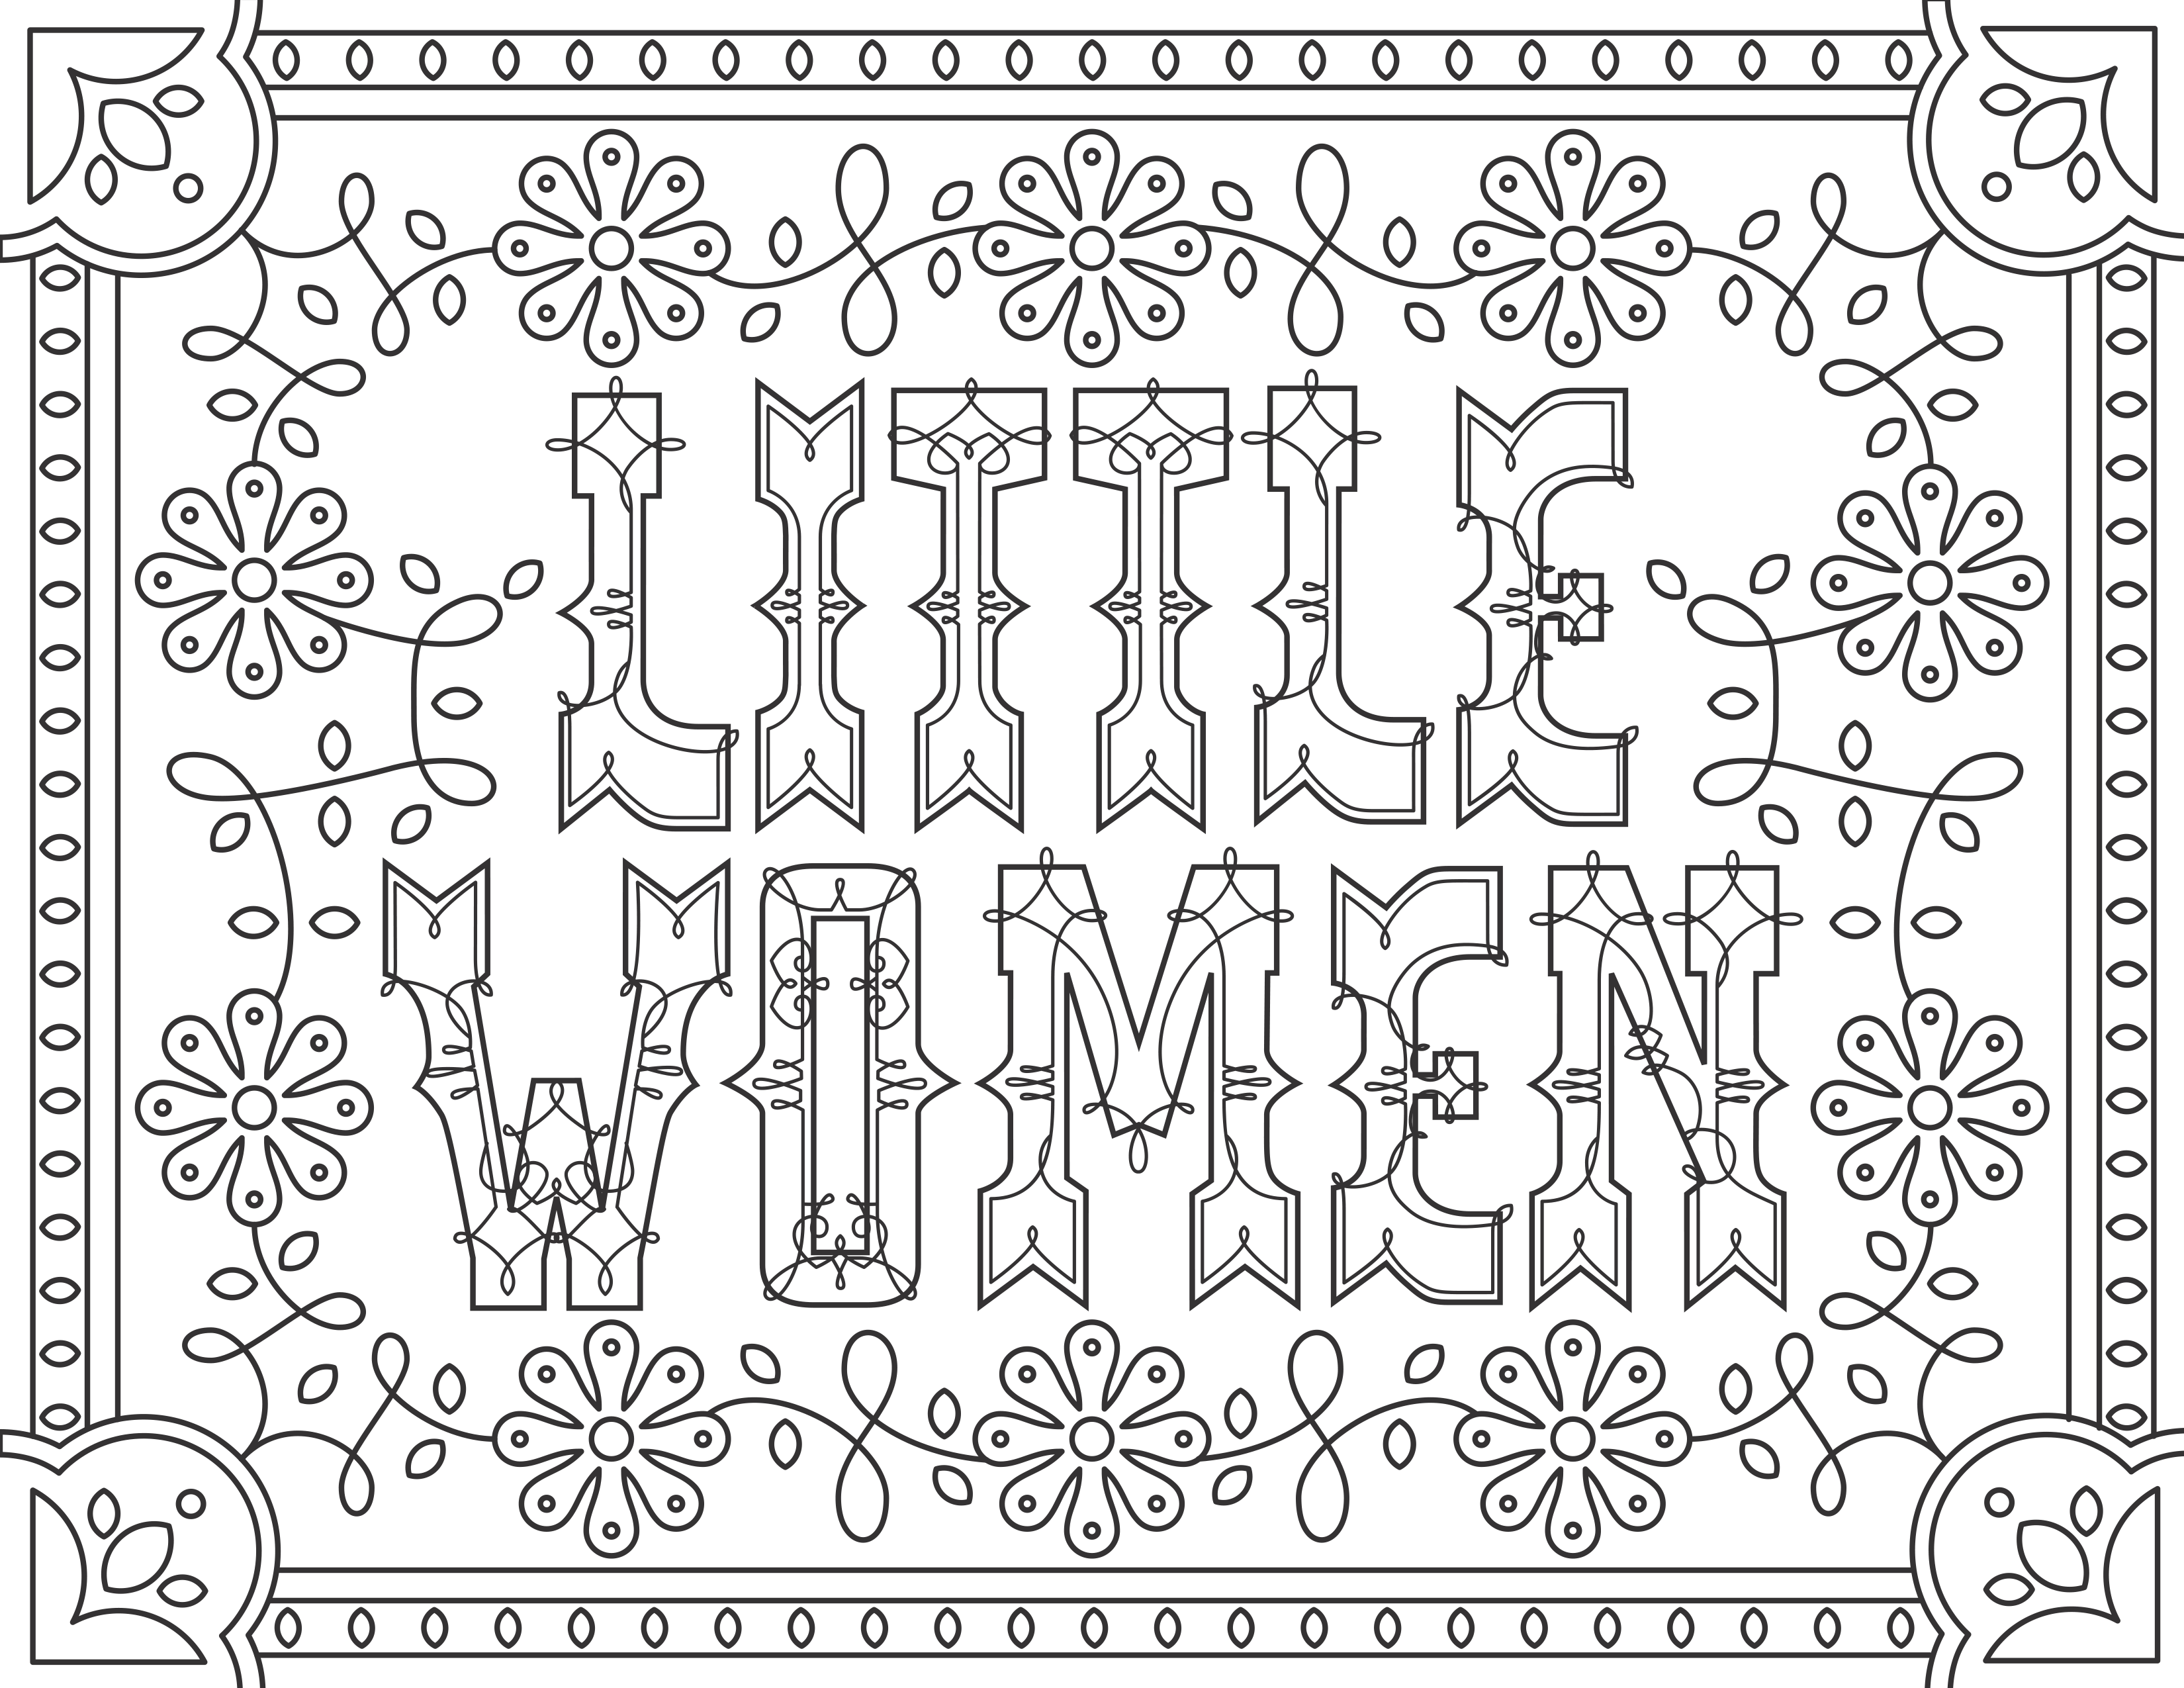 Download Little Women - Movies Adult Coloring Pages